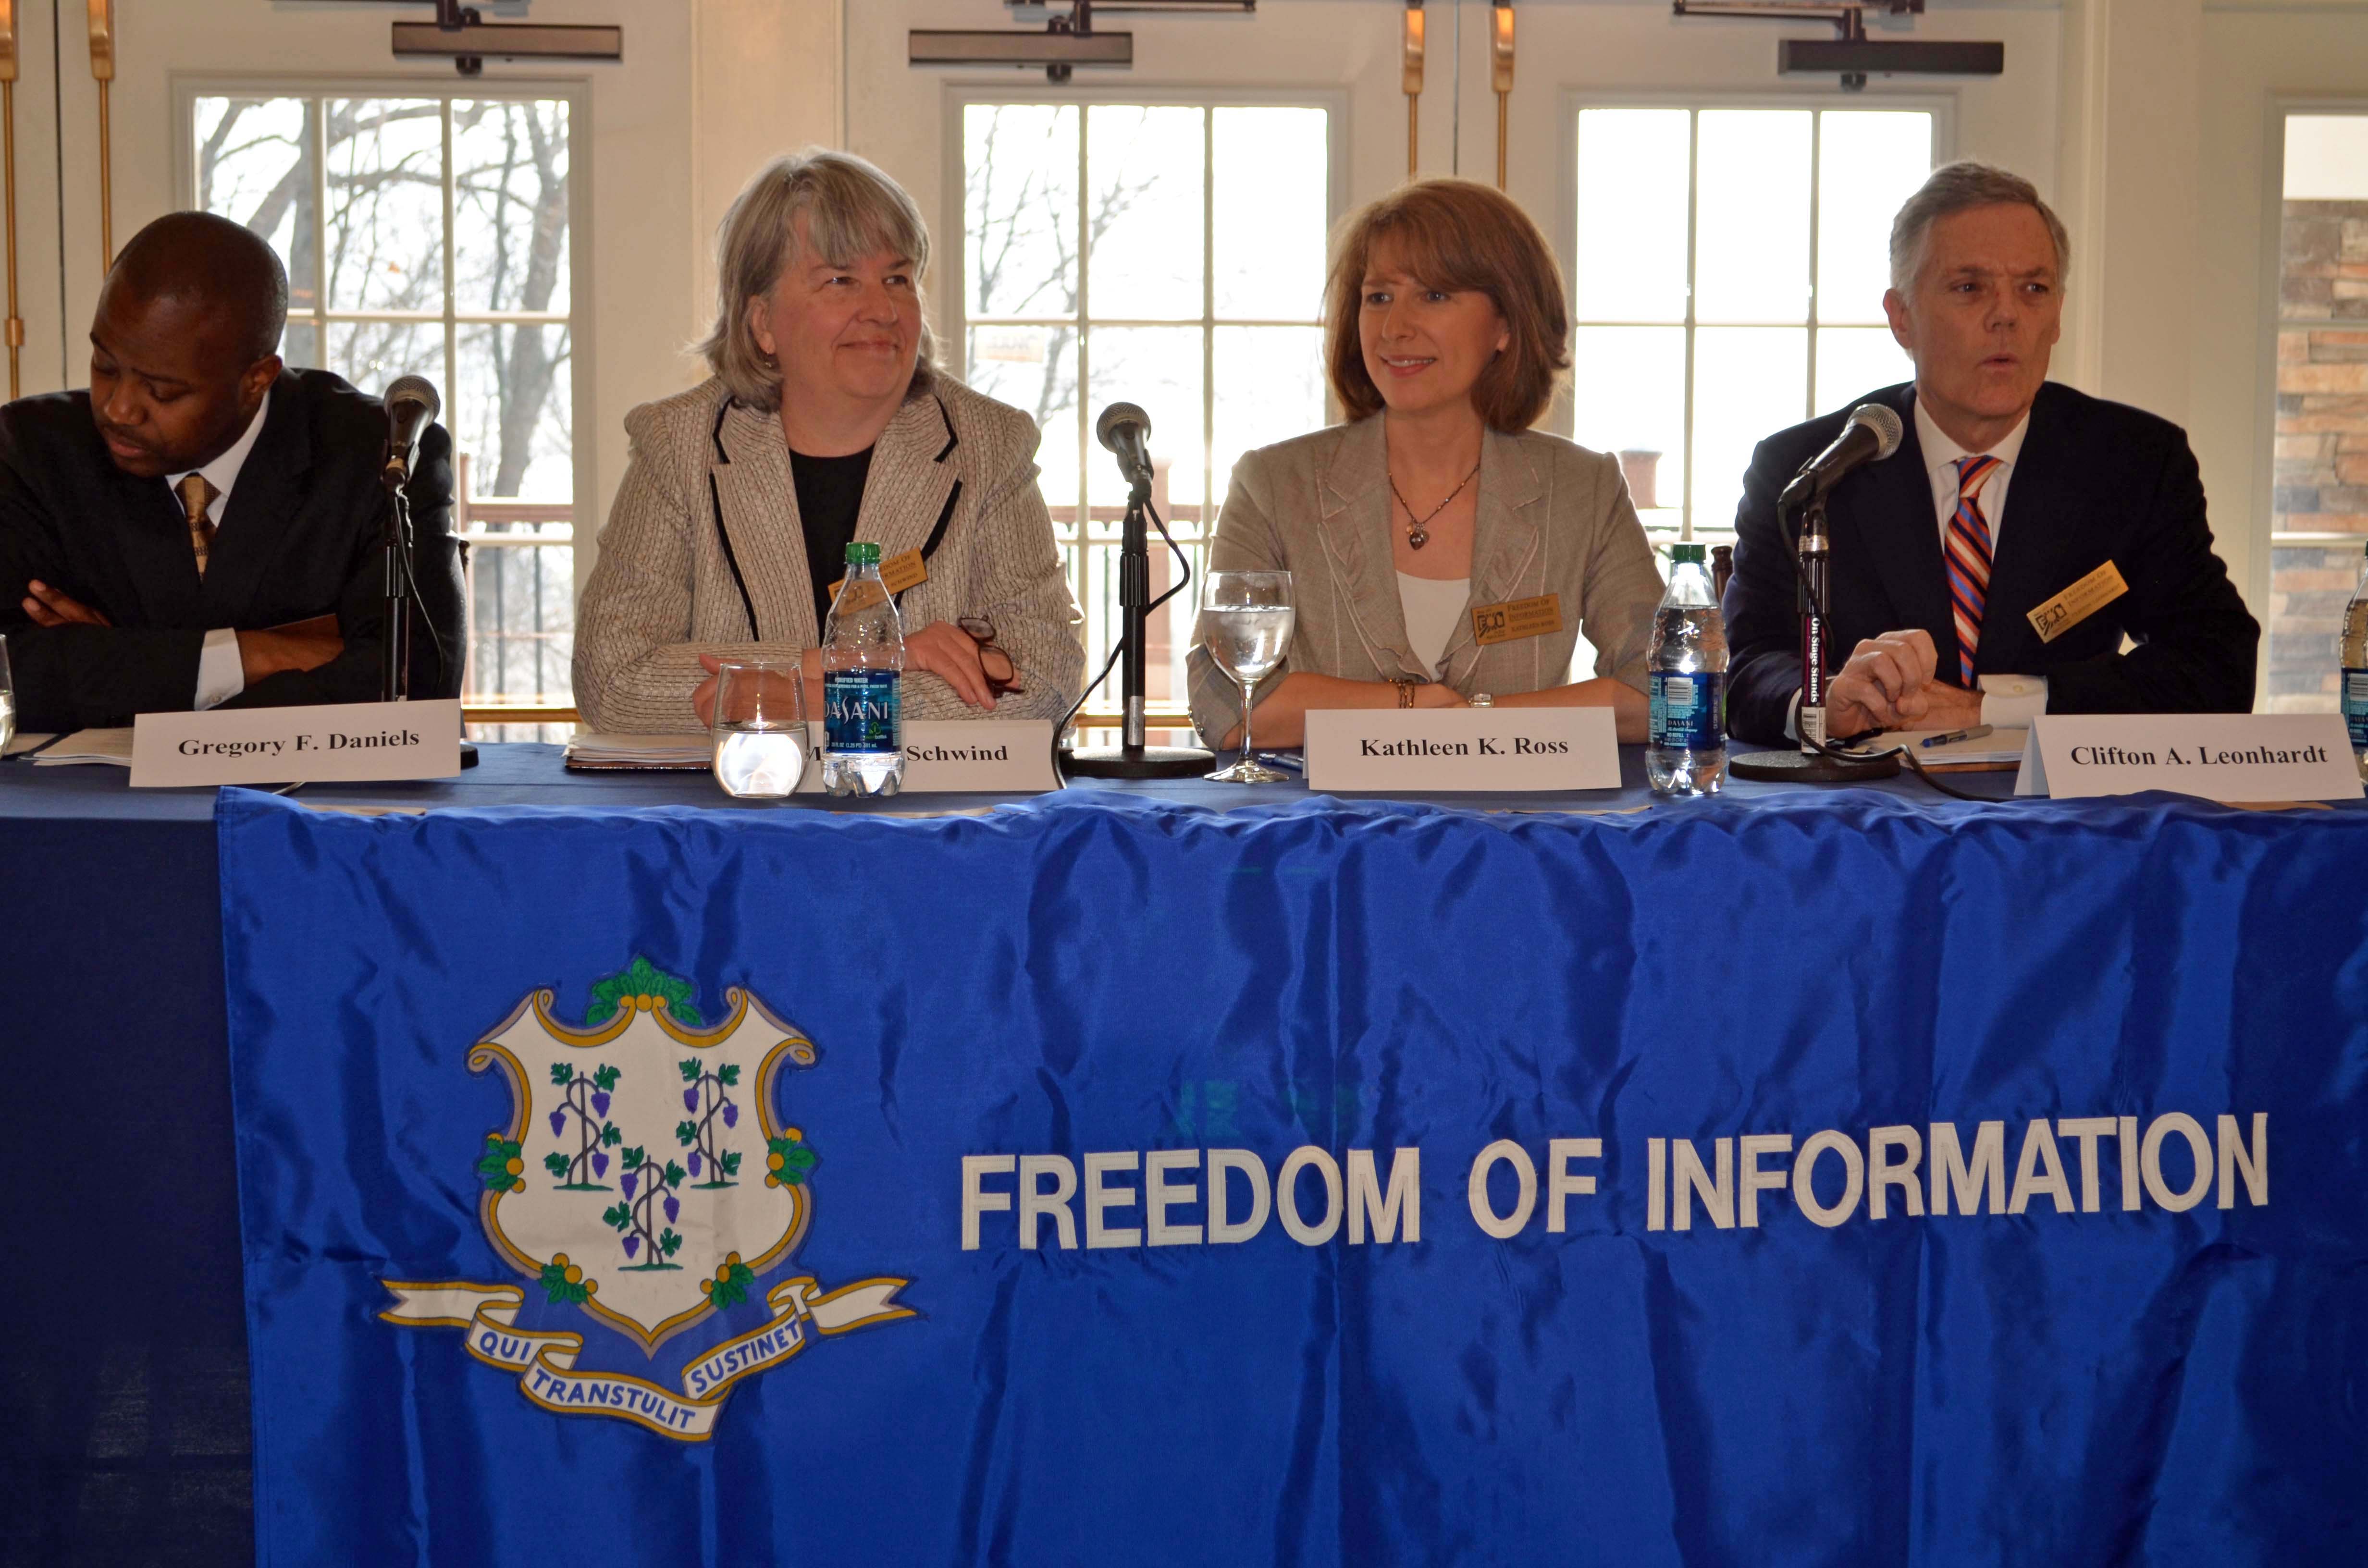 Commission staff members (l-r) Gregory Daniels, Mary Schwind, Kathleen Ross, and Clifton Leonhardt answer questions during the “FOI Nuts and Bolts” panel discussion.